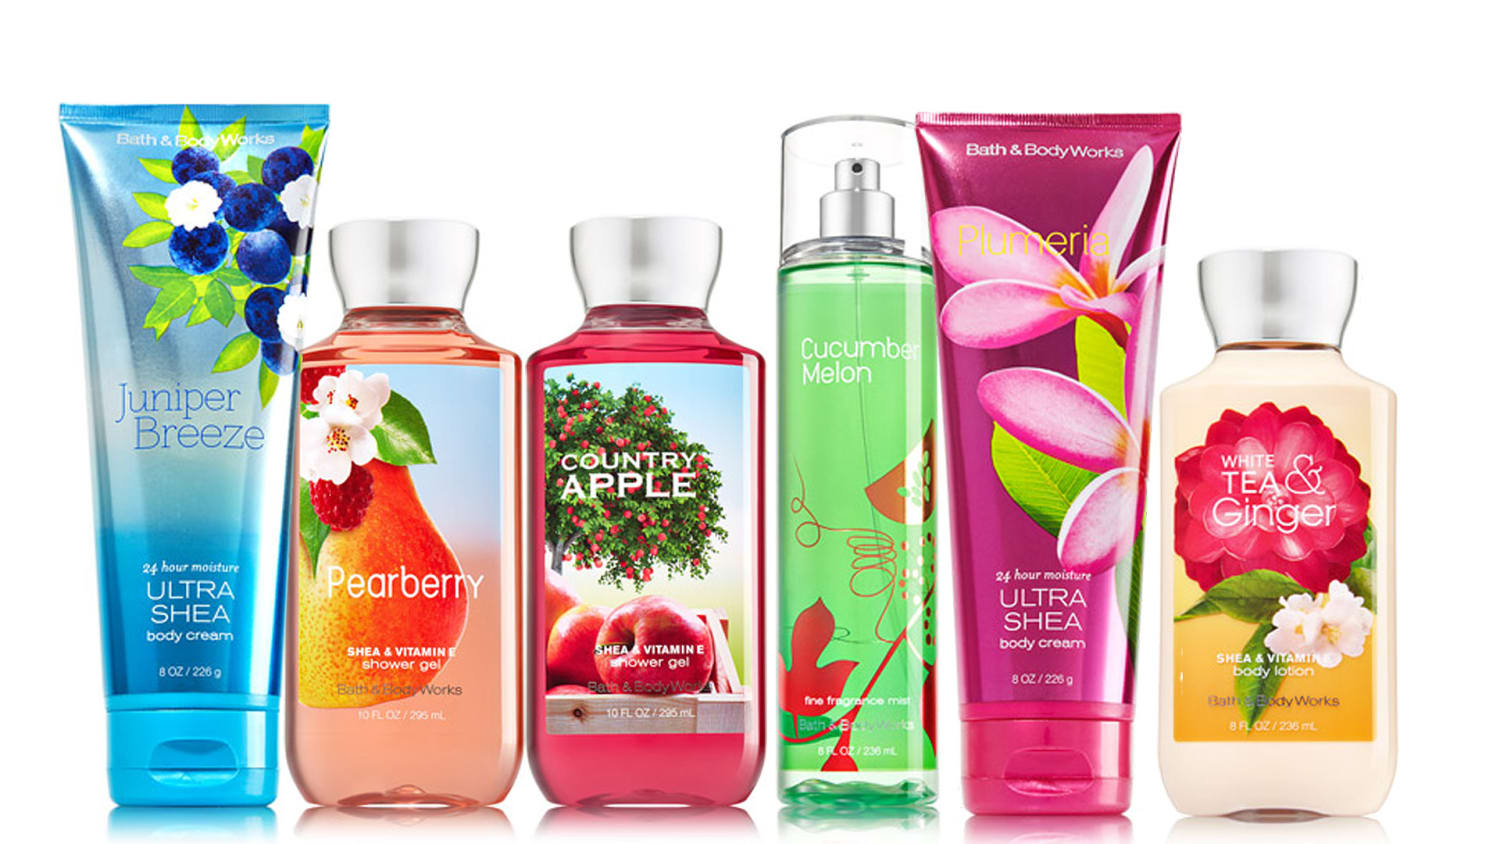 Bath and Body Works brings back iconic ‘90s scents for new campaign